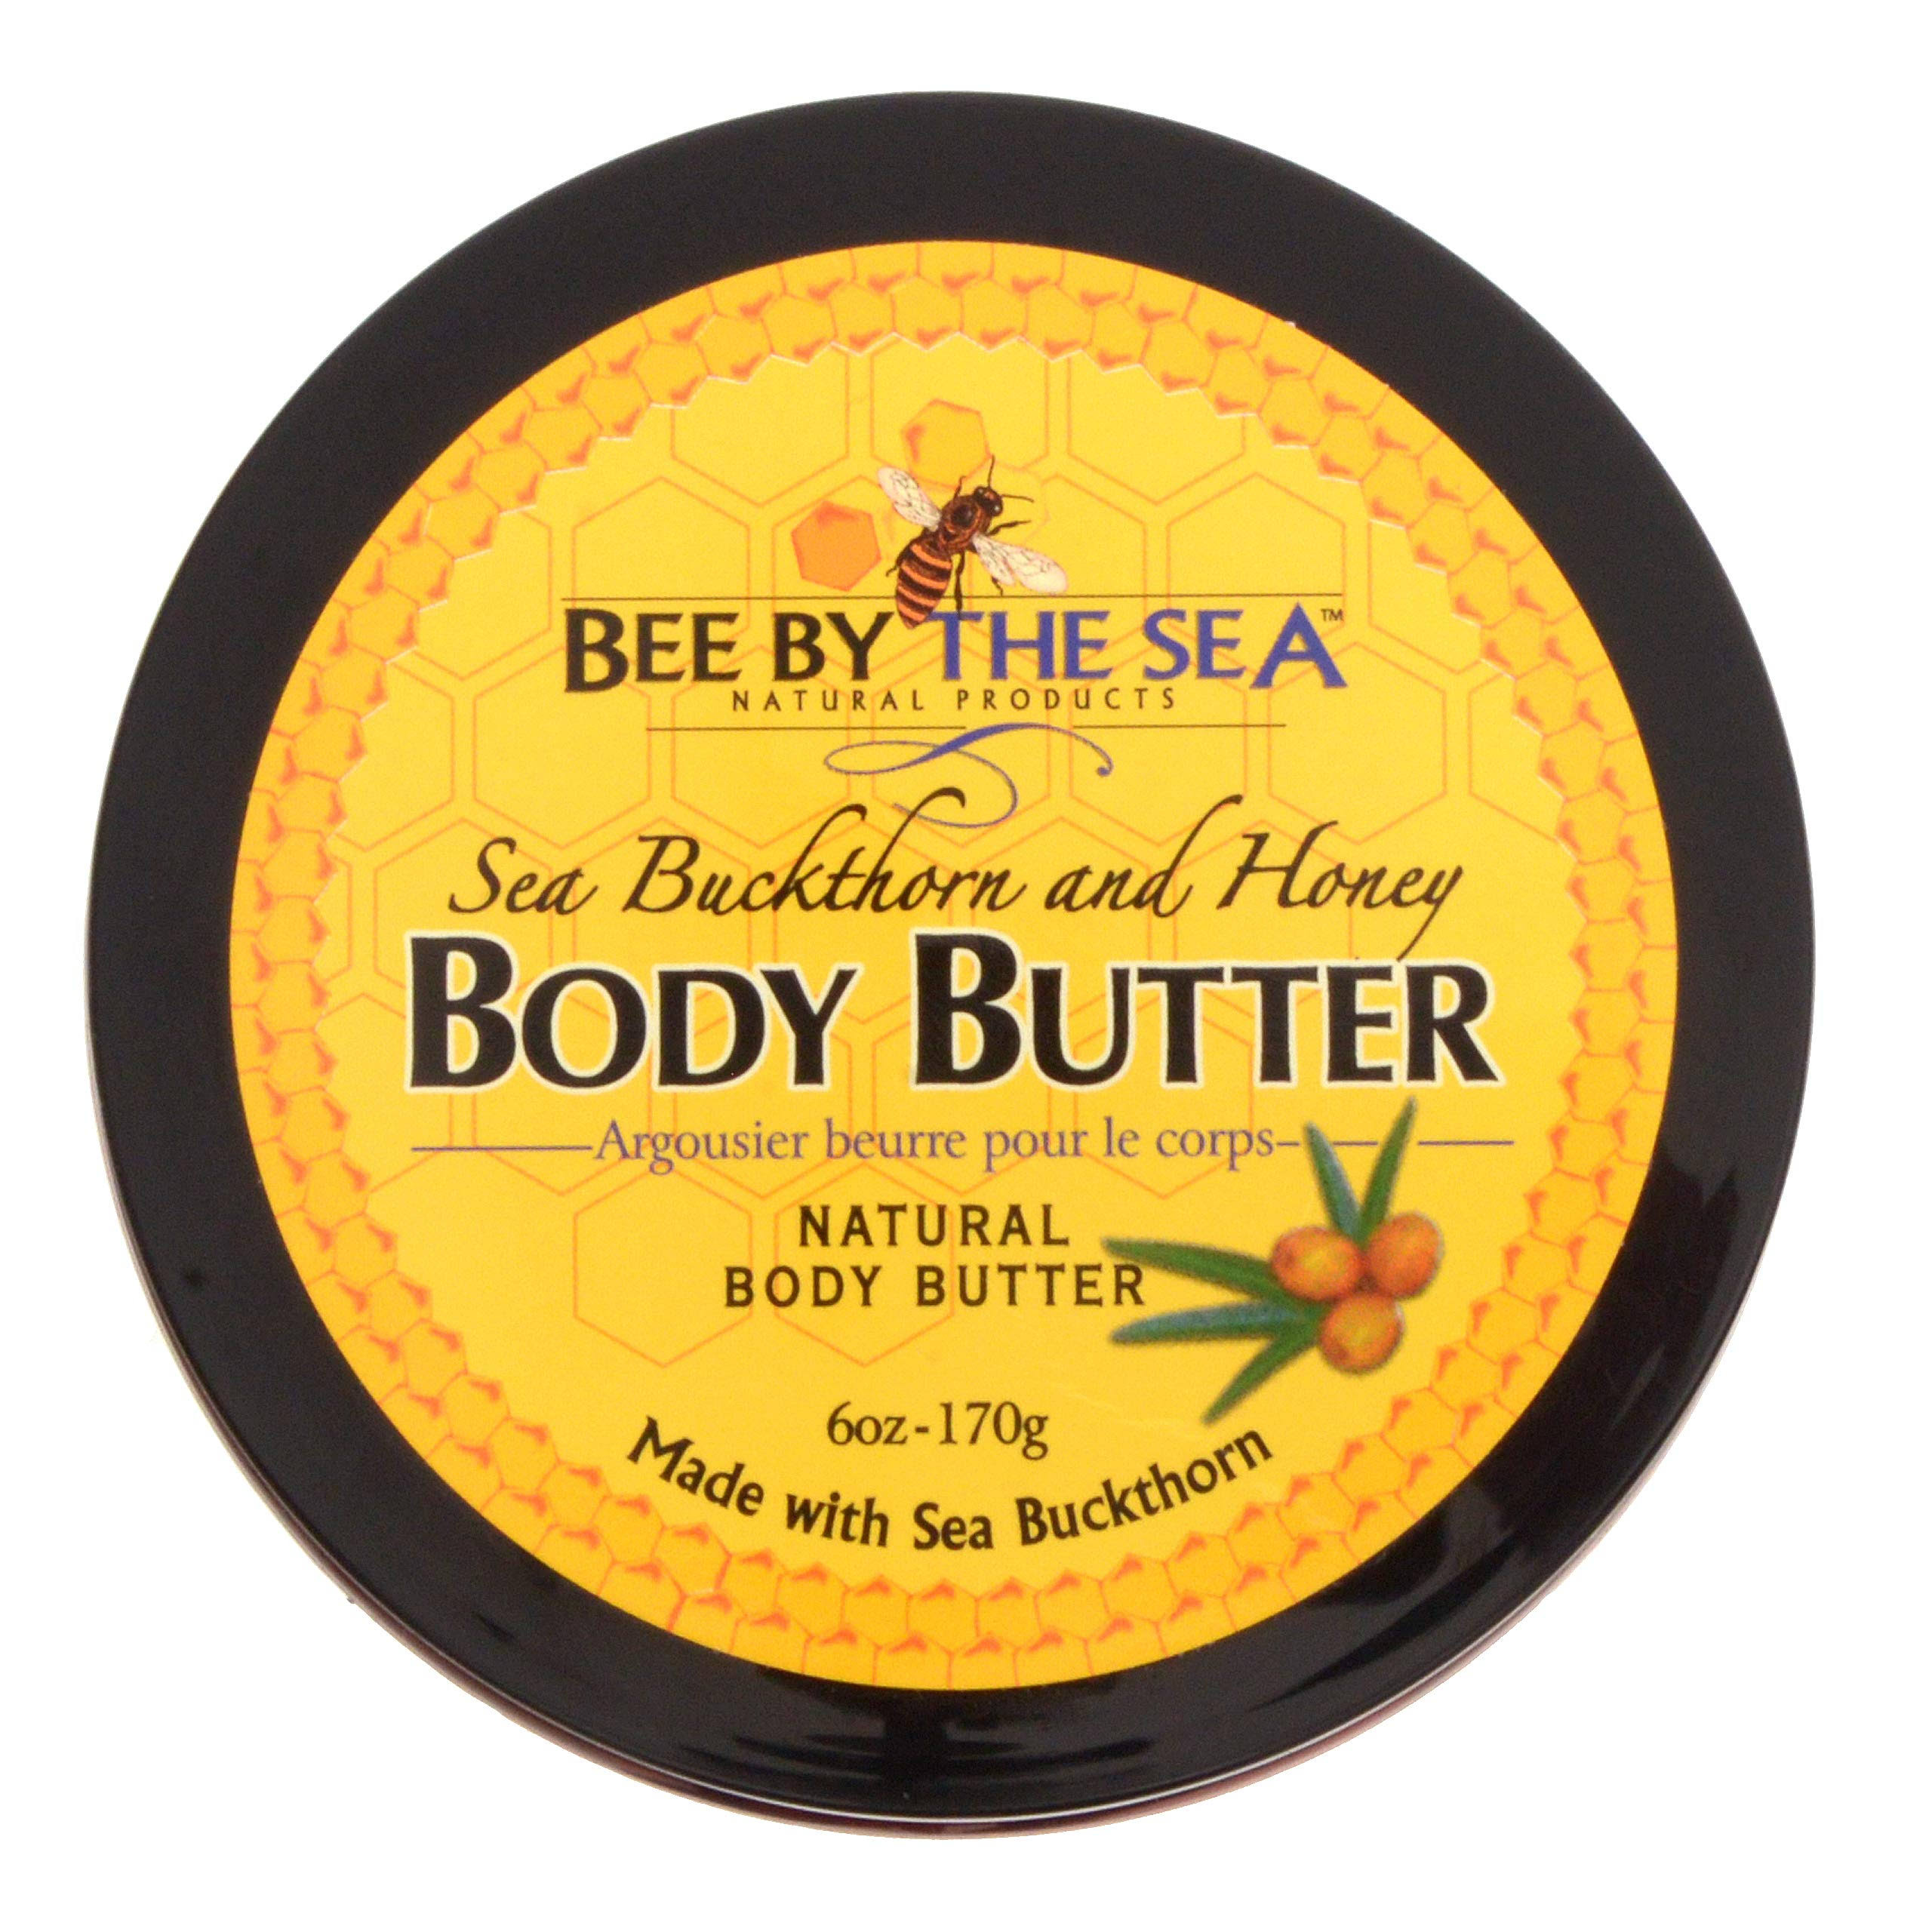 Bee By the Sea Body Butter Personal Care - 6oz